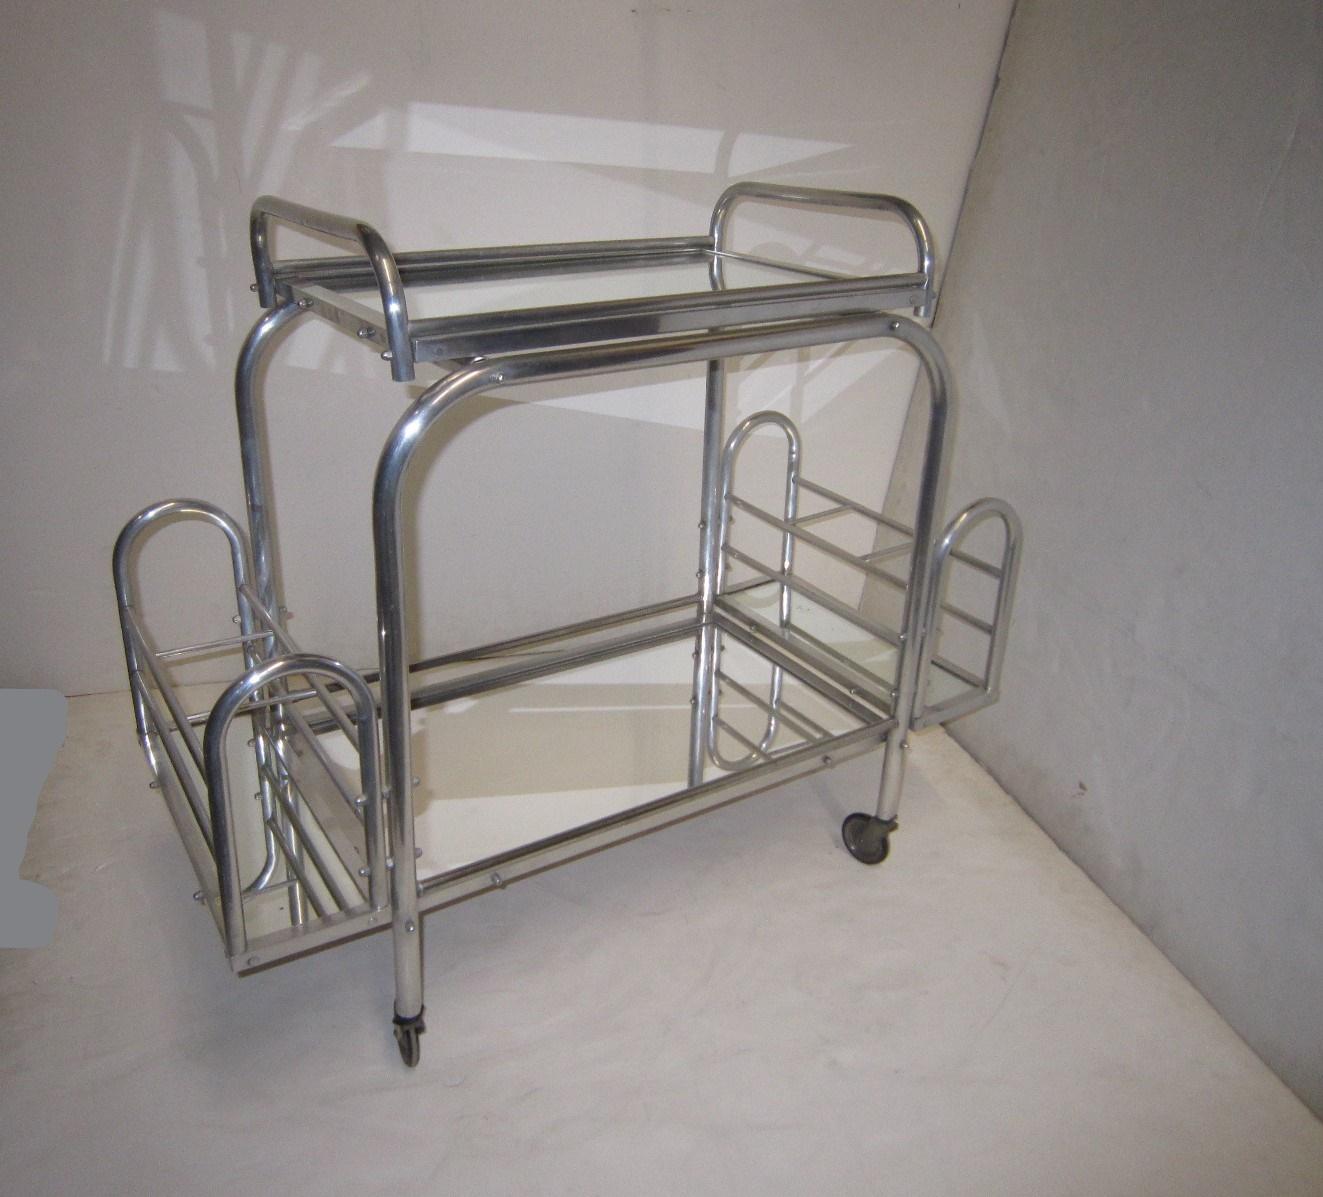 A lovely French Art Deco tubular chrome and mirror serving cart or trolly with removable tray by Jacques Adnet.
All original components intact with nothing missing: removable tray, two side compartments for bottles and storage,
and original